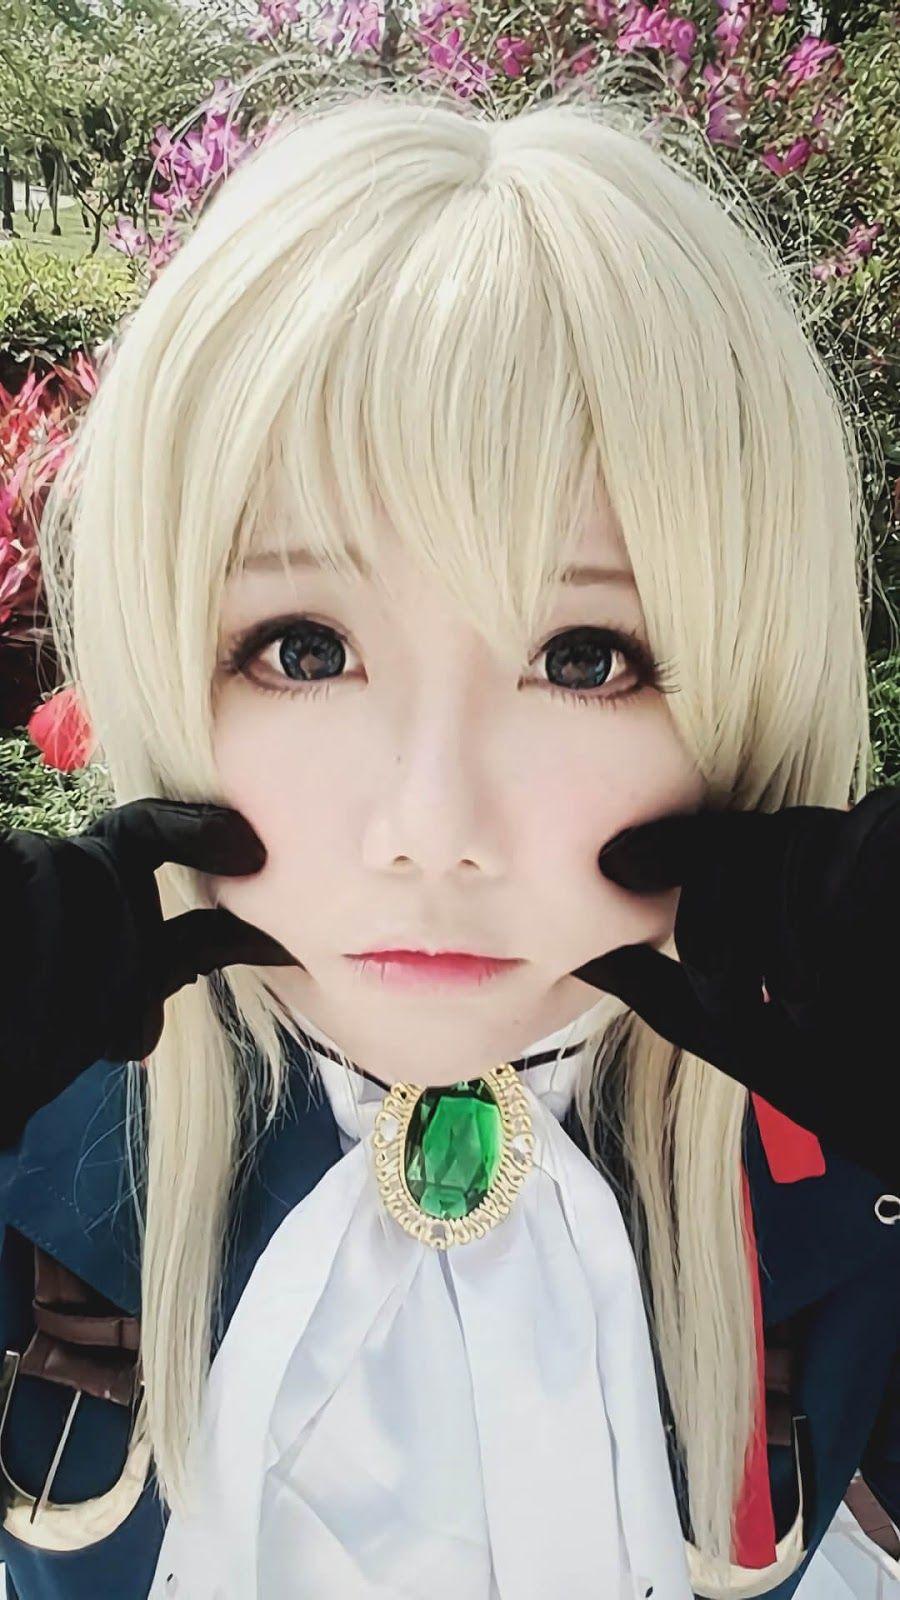 Cuteness Overload: 36 Super Cute Images Of Anime Cosplayers - Animated Times